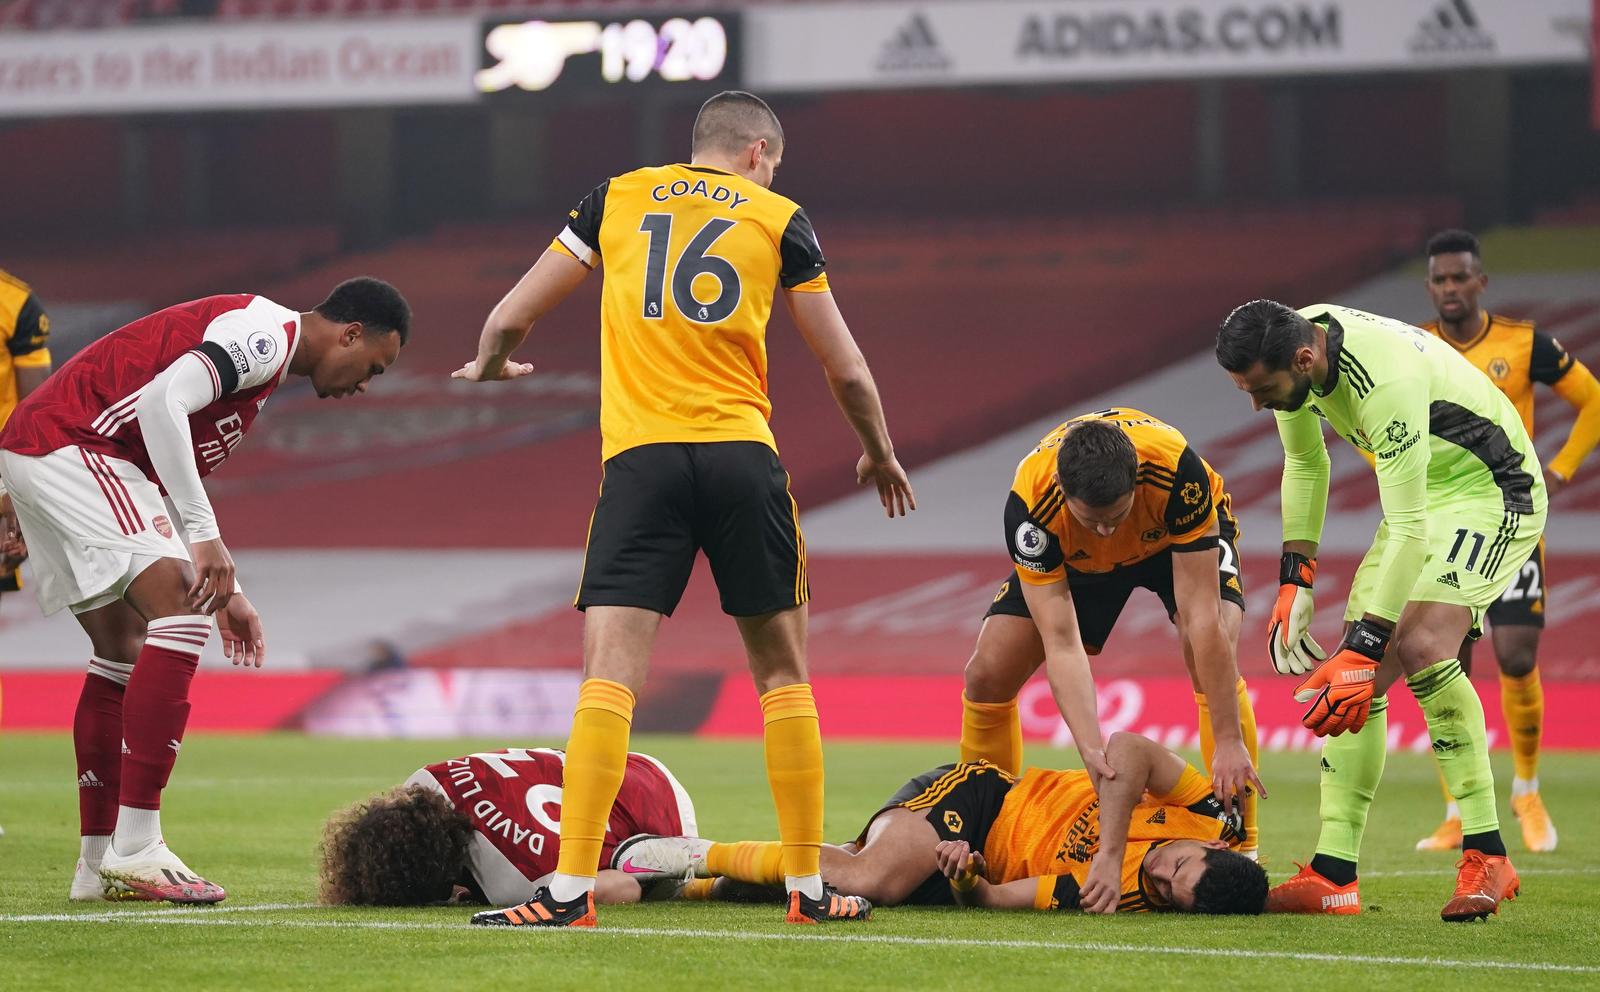 Wolves manager feared for Jimenez after head injury